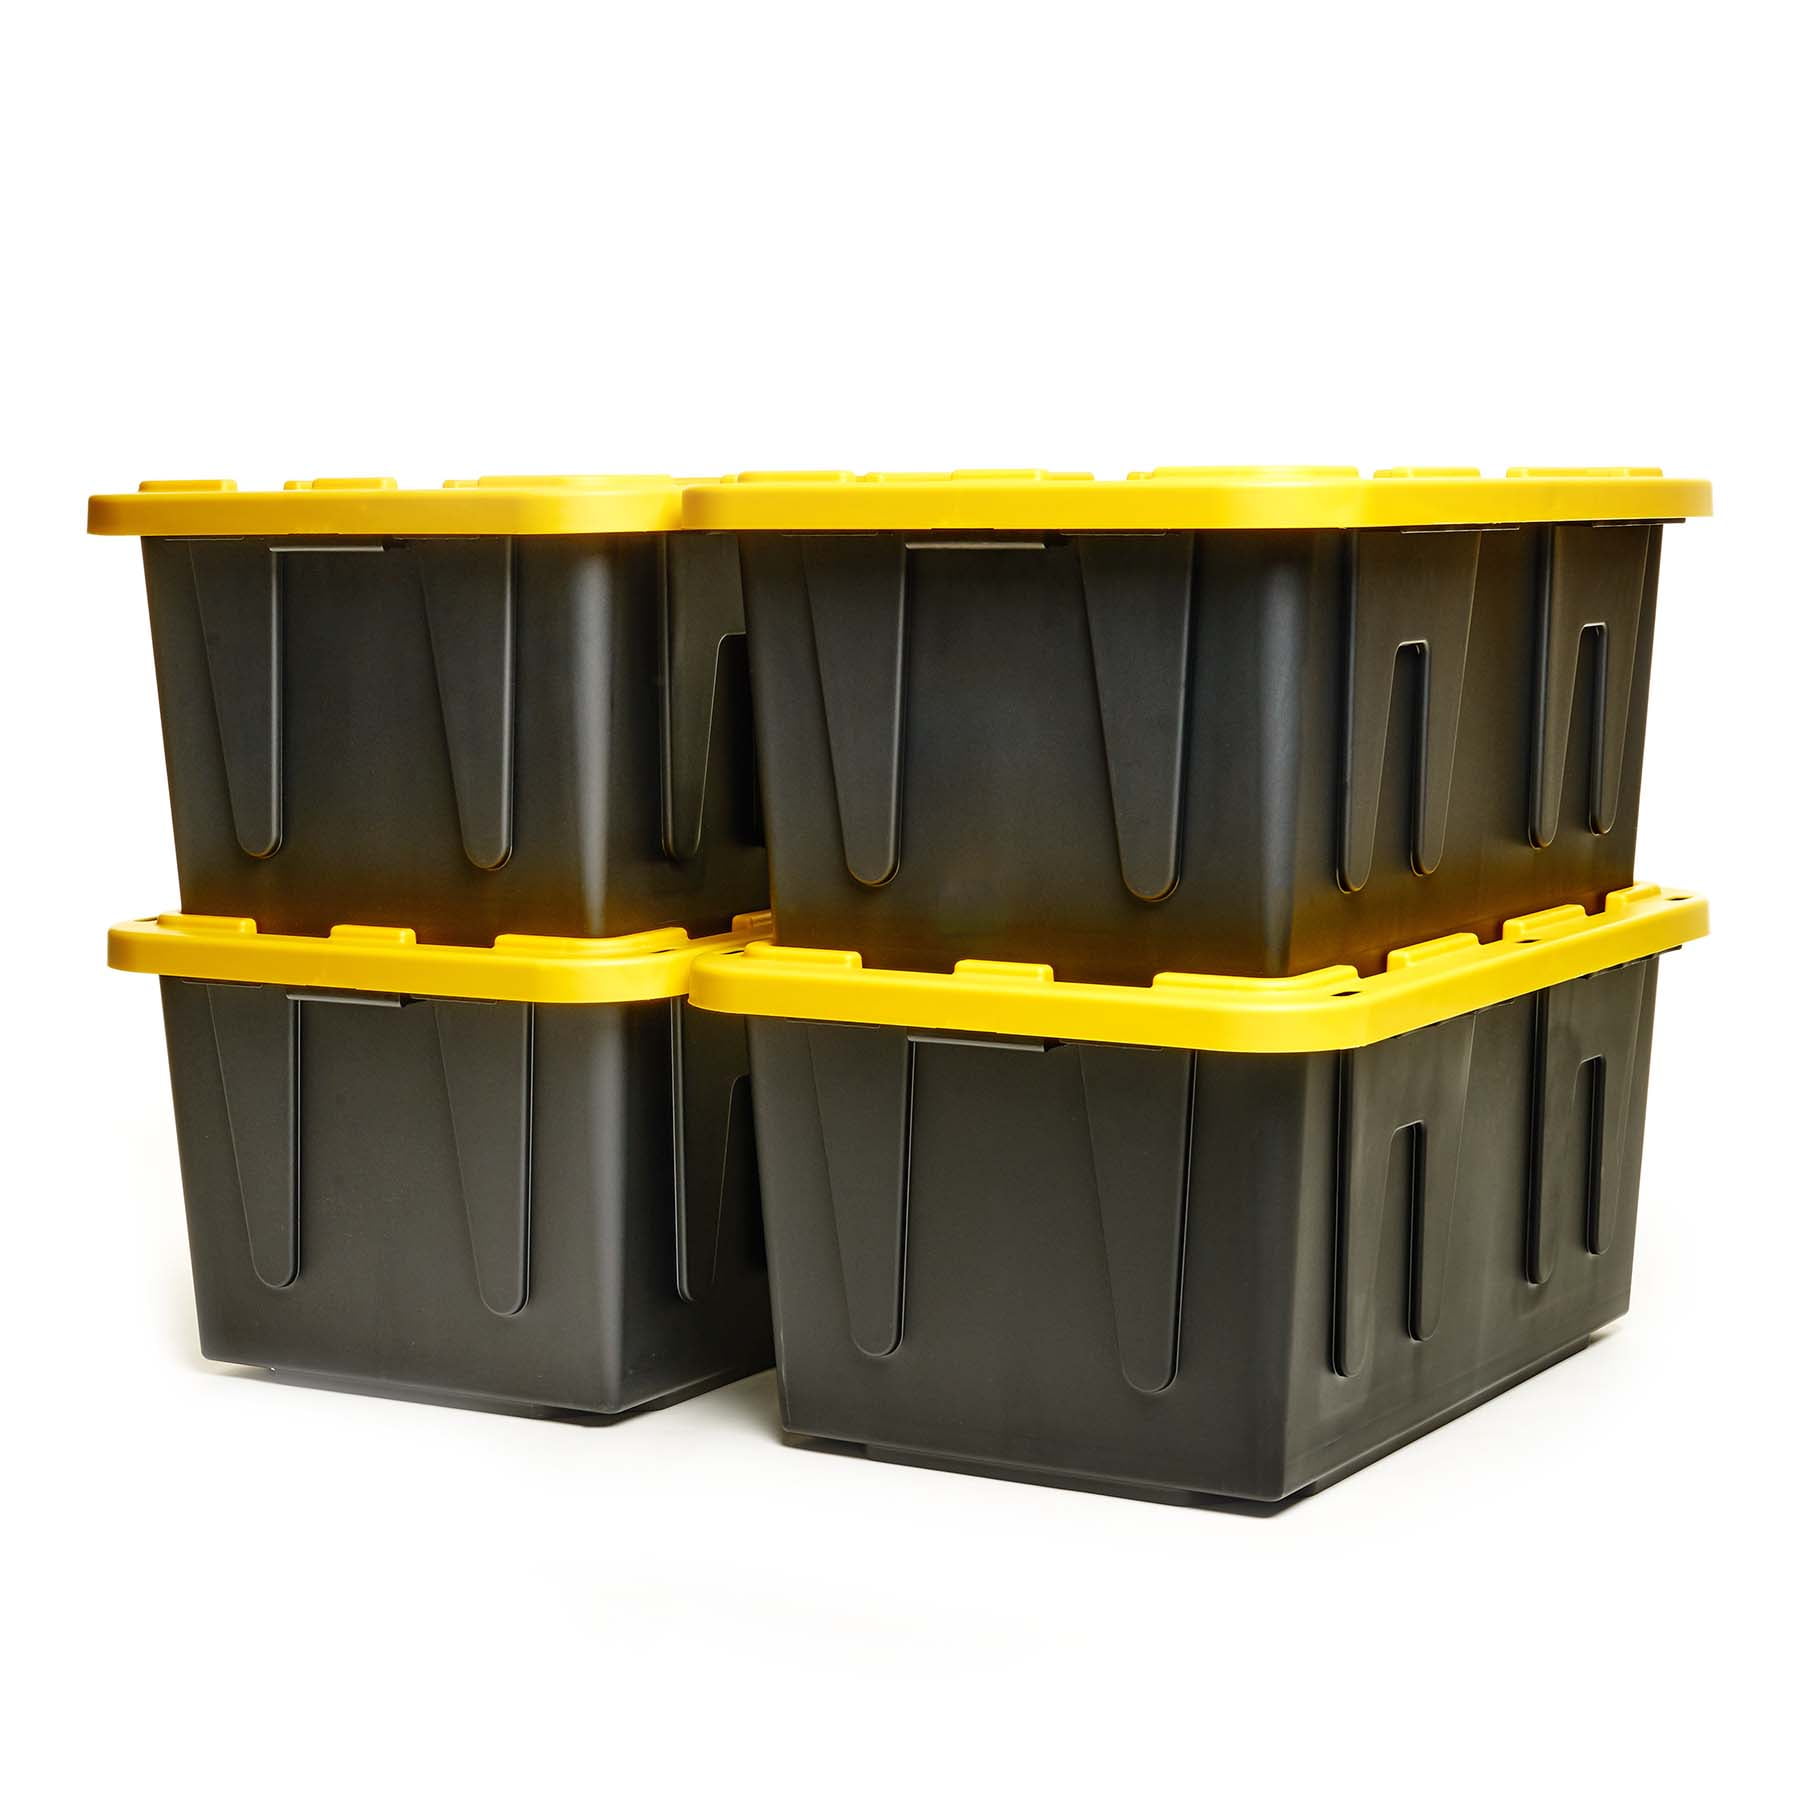 HDX 27 Gal. Tough Storage Tote in Black with Yellow Lid